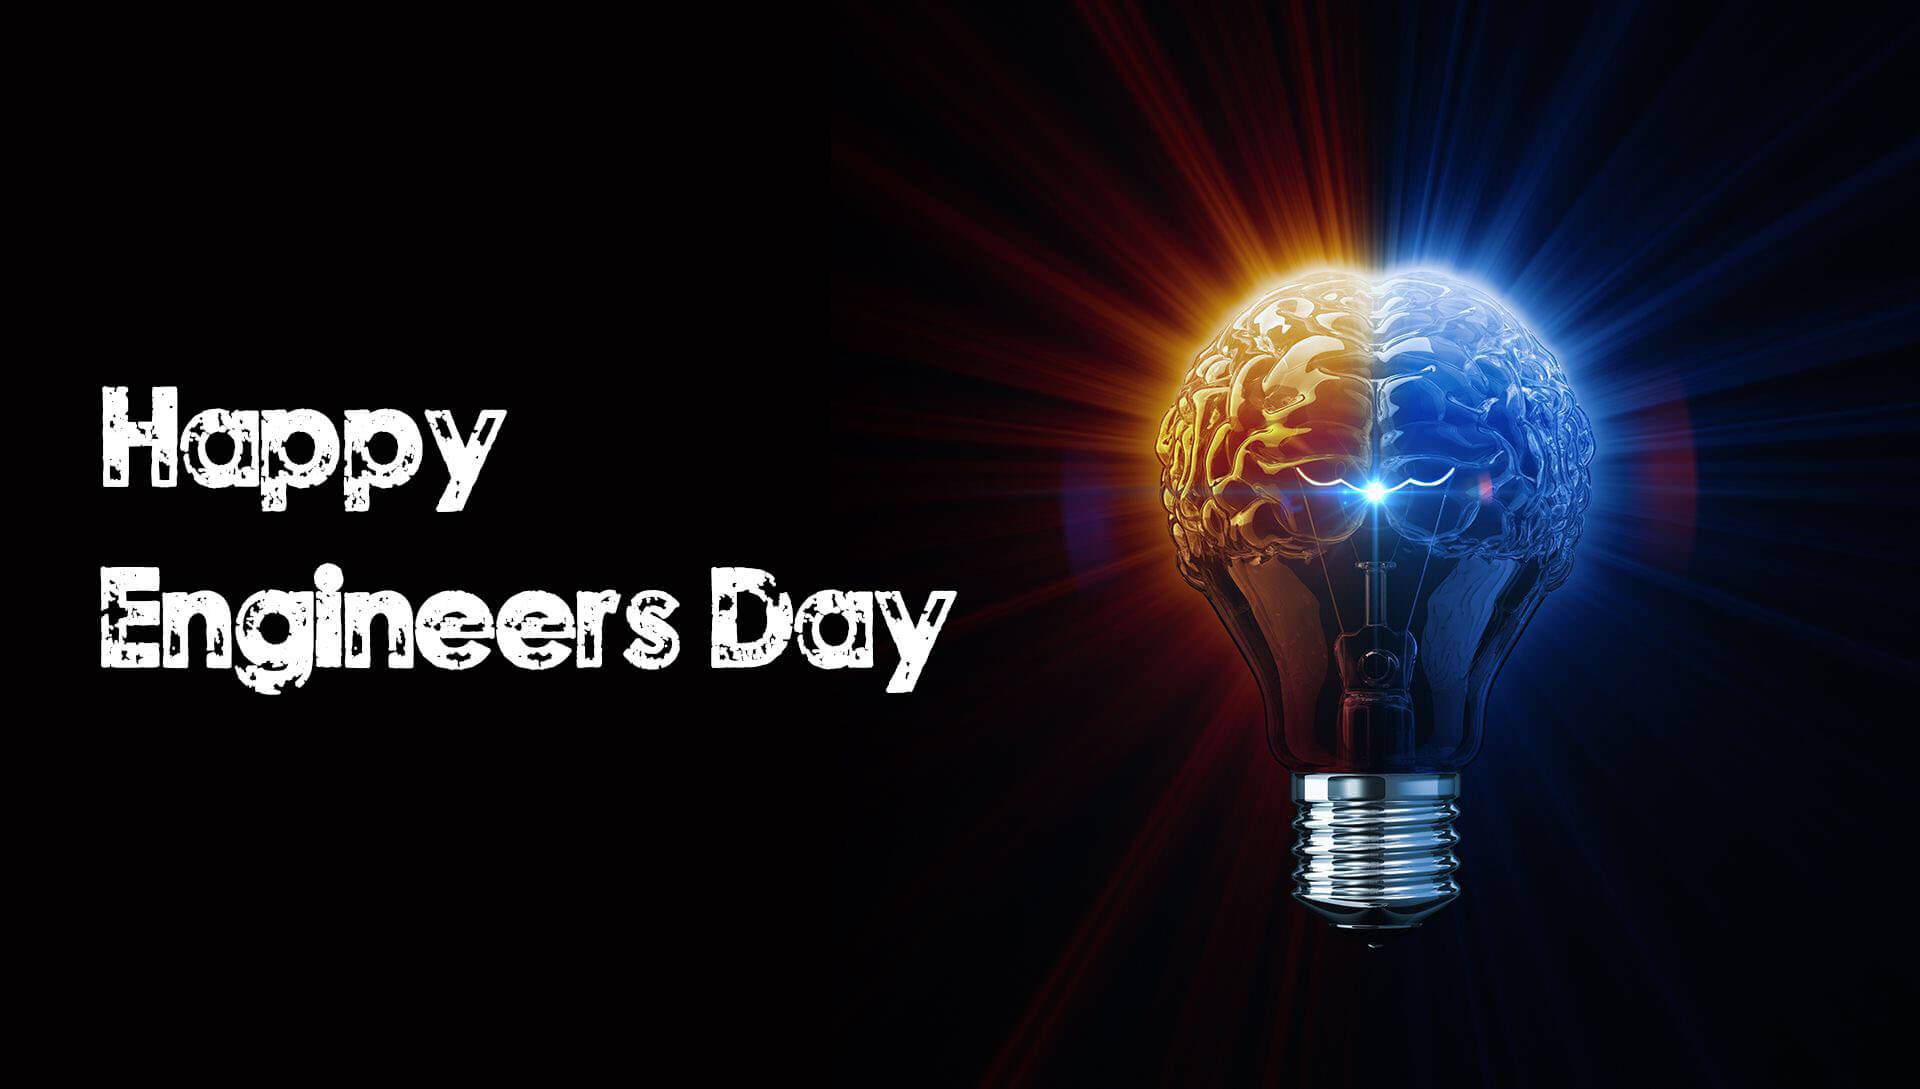 Happy Engineer's Day 2020: Wishes, Greetings, Pictures and GIFs